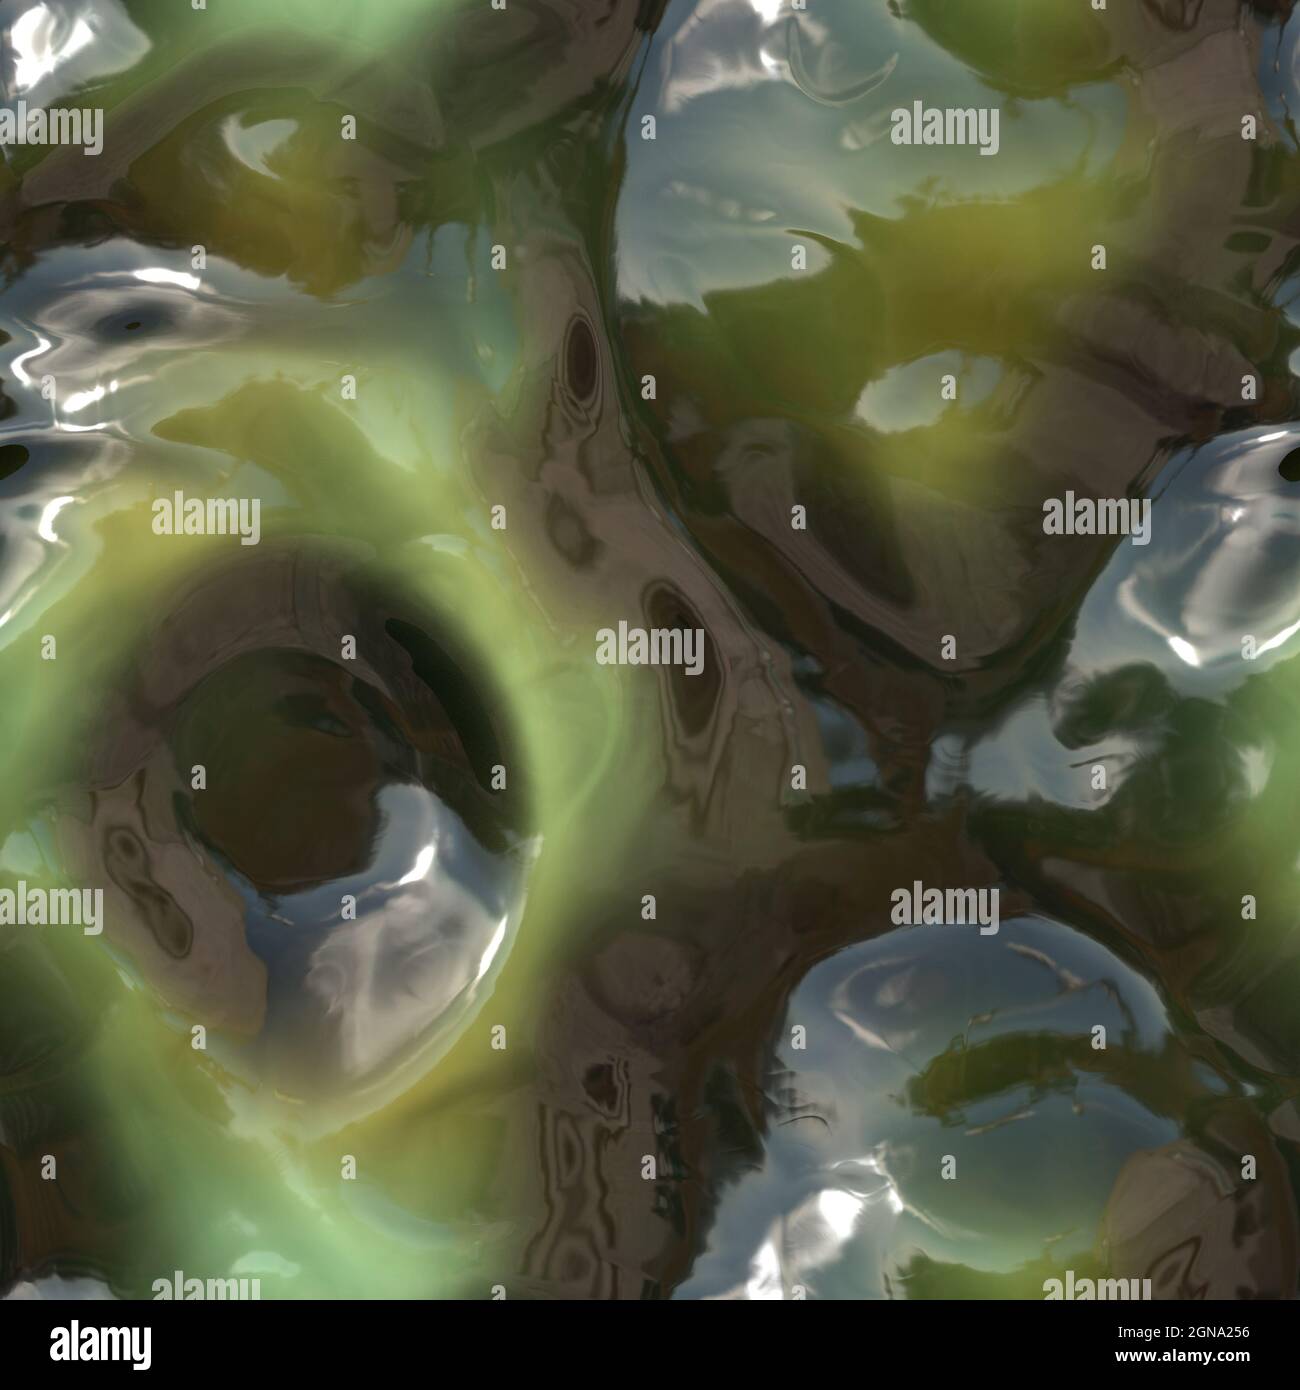 Gloopy rancid slimy mouldy green slimy spawn Stock Photo